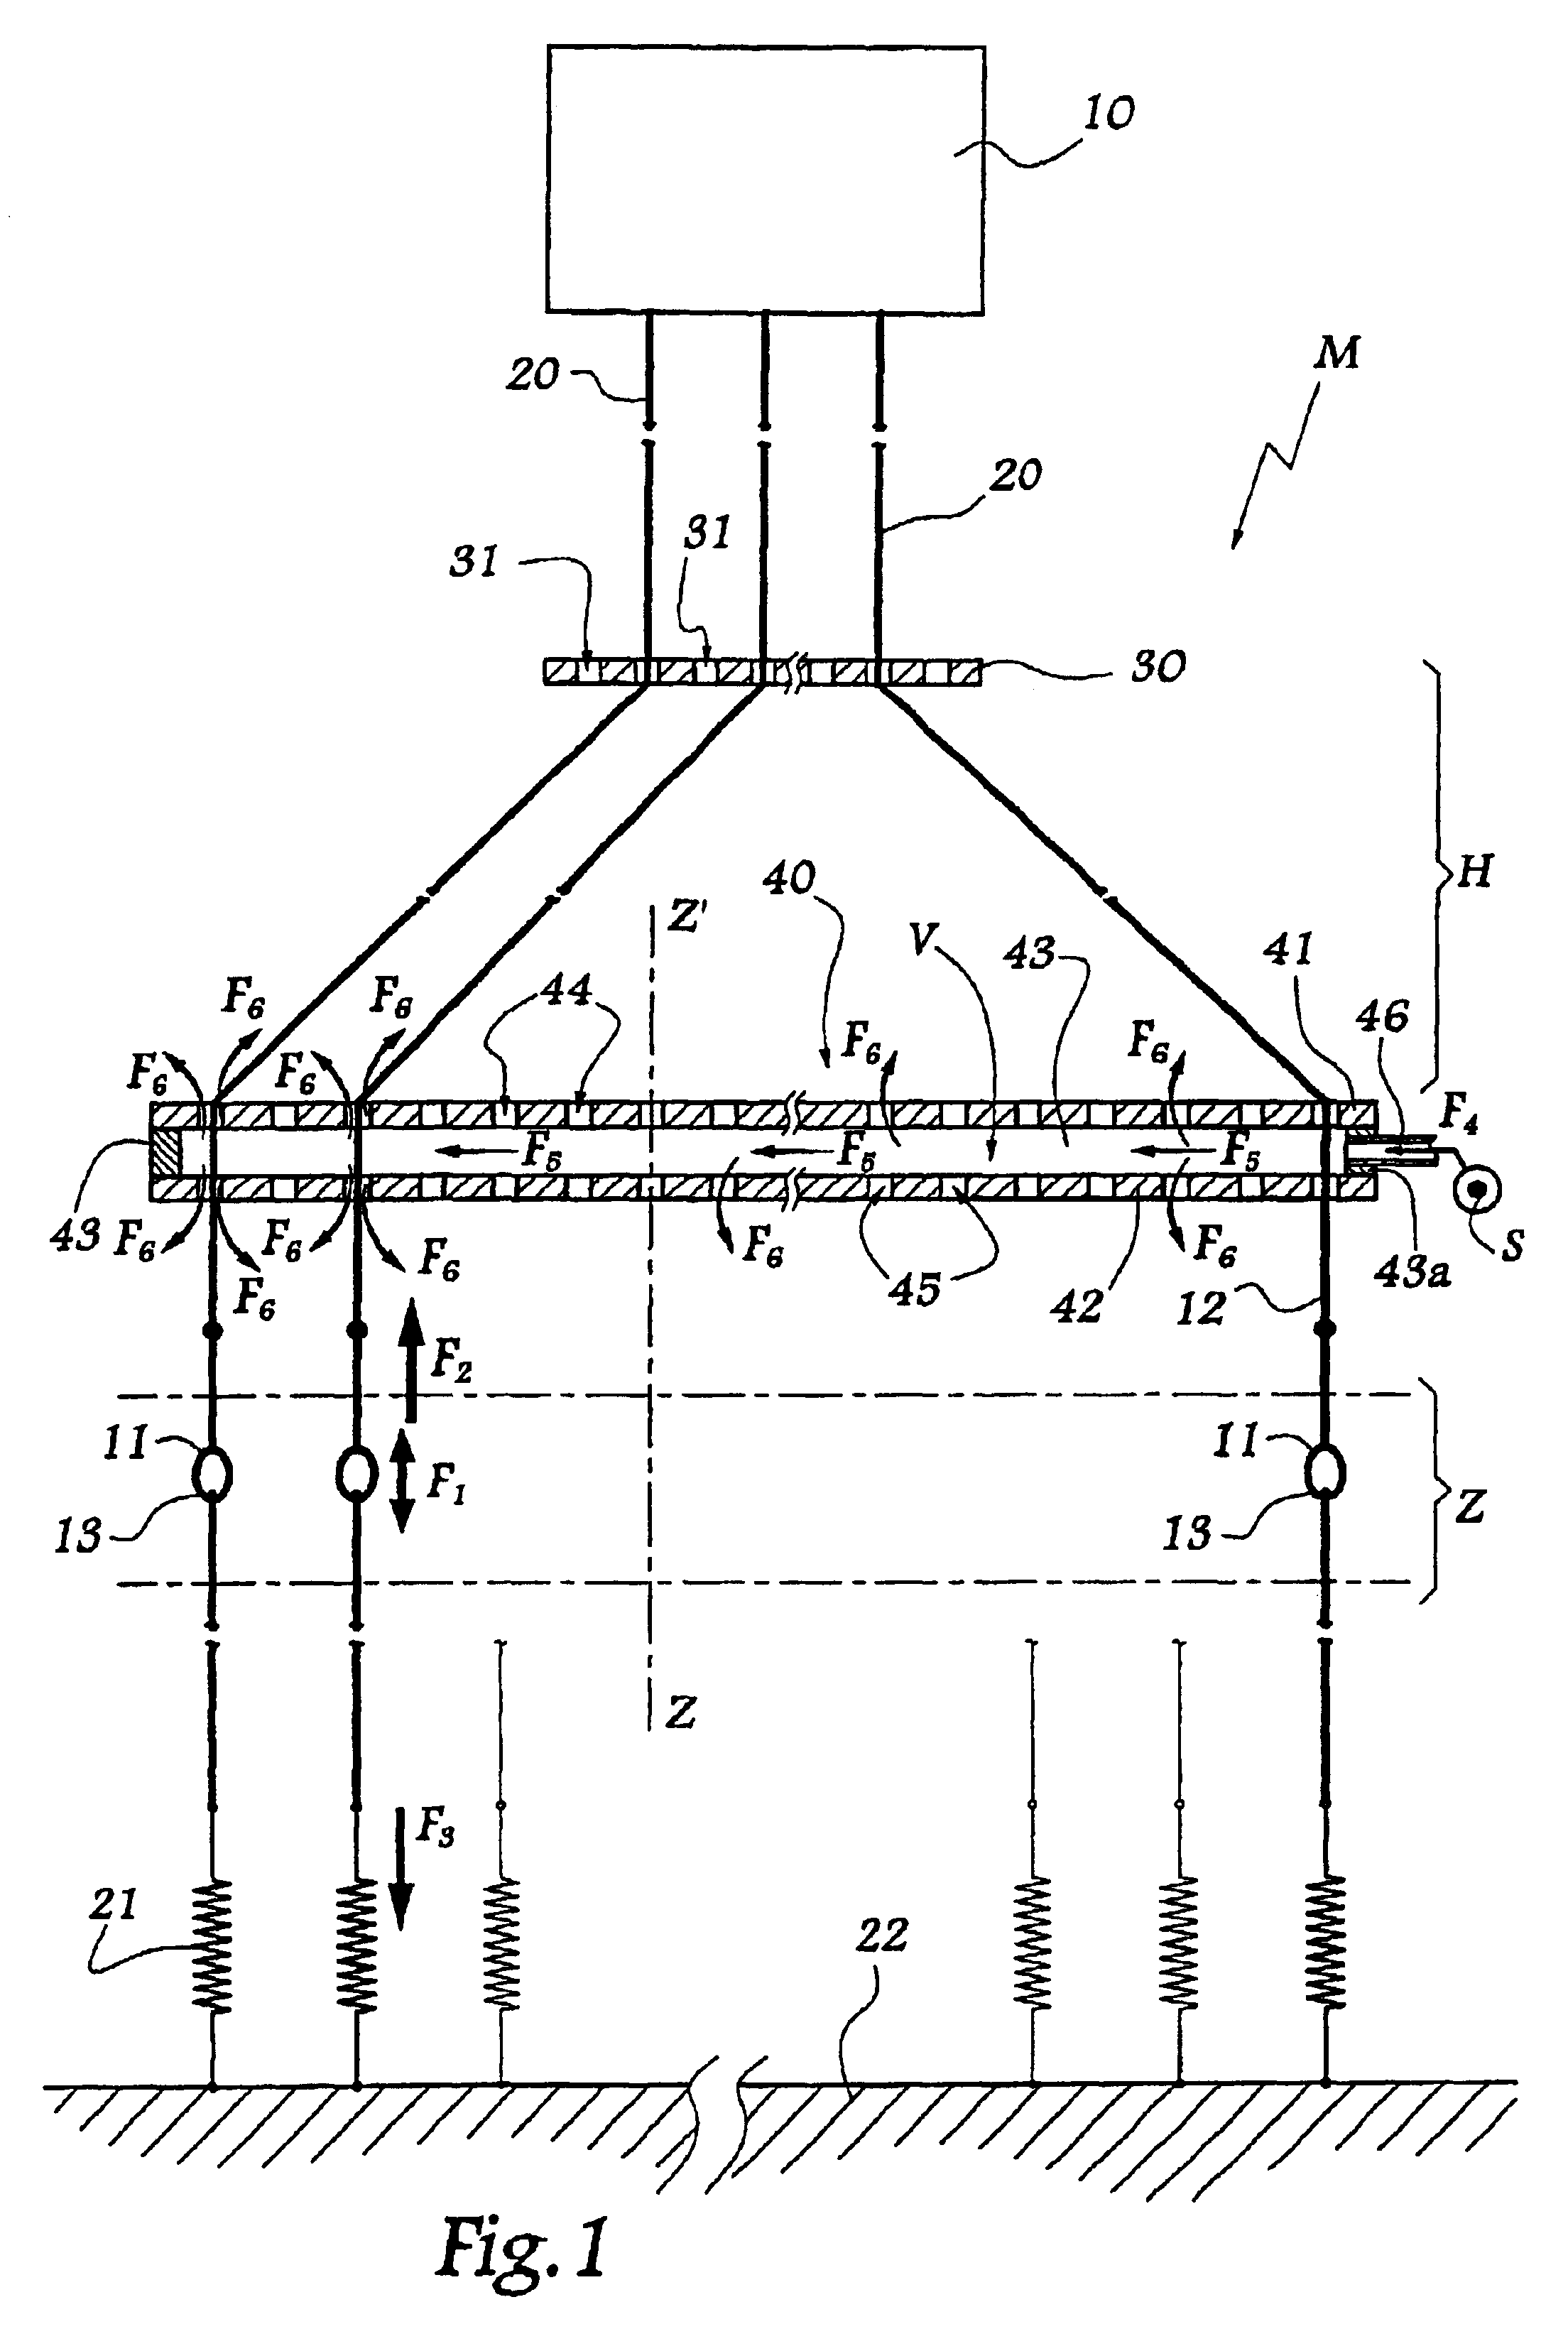 Method and apparatus for guiding the harness cords of a Jacquard loom